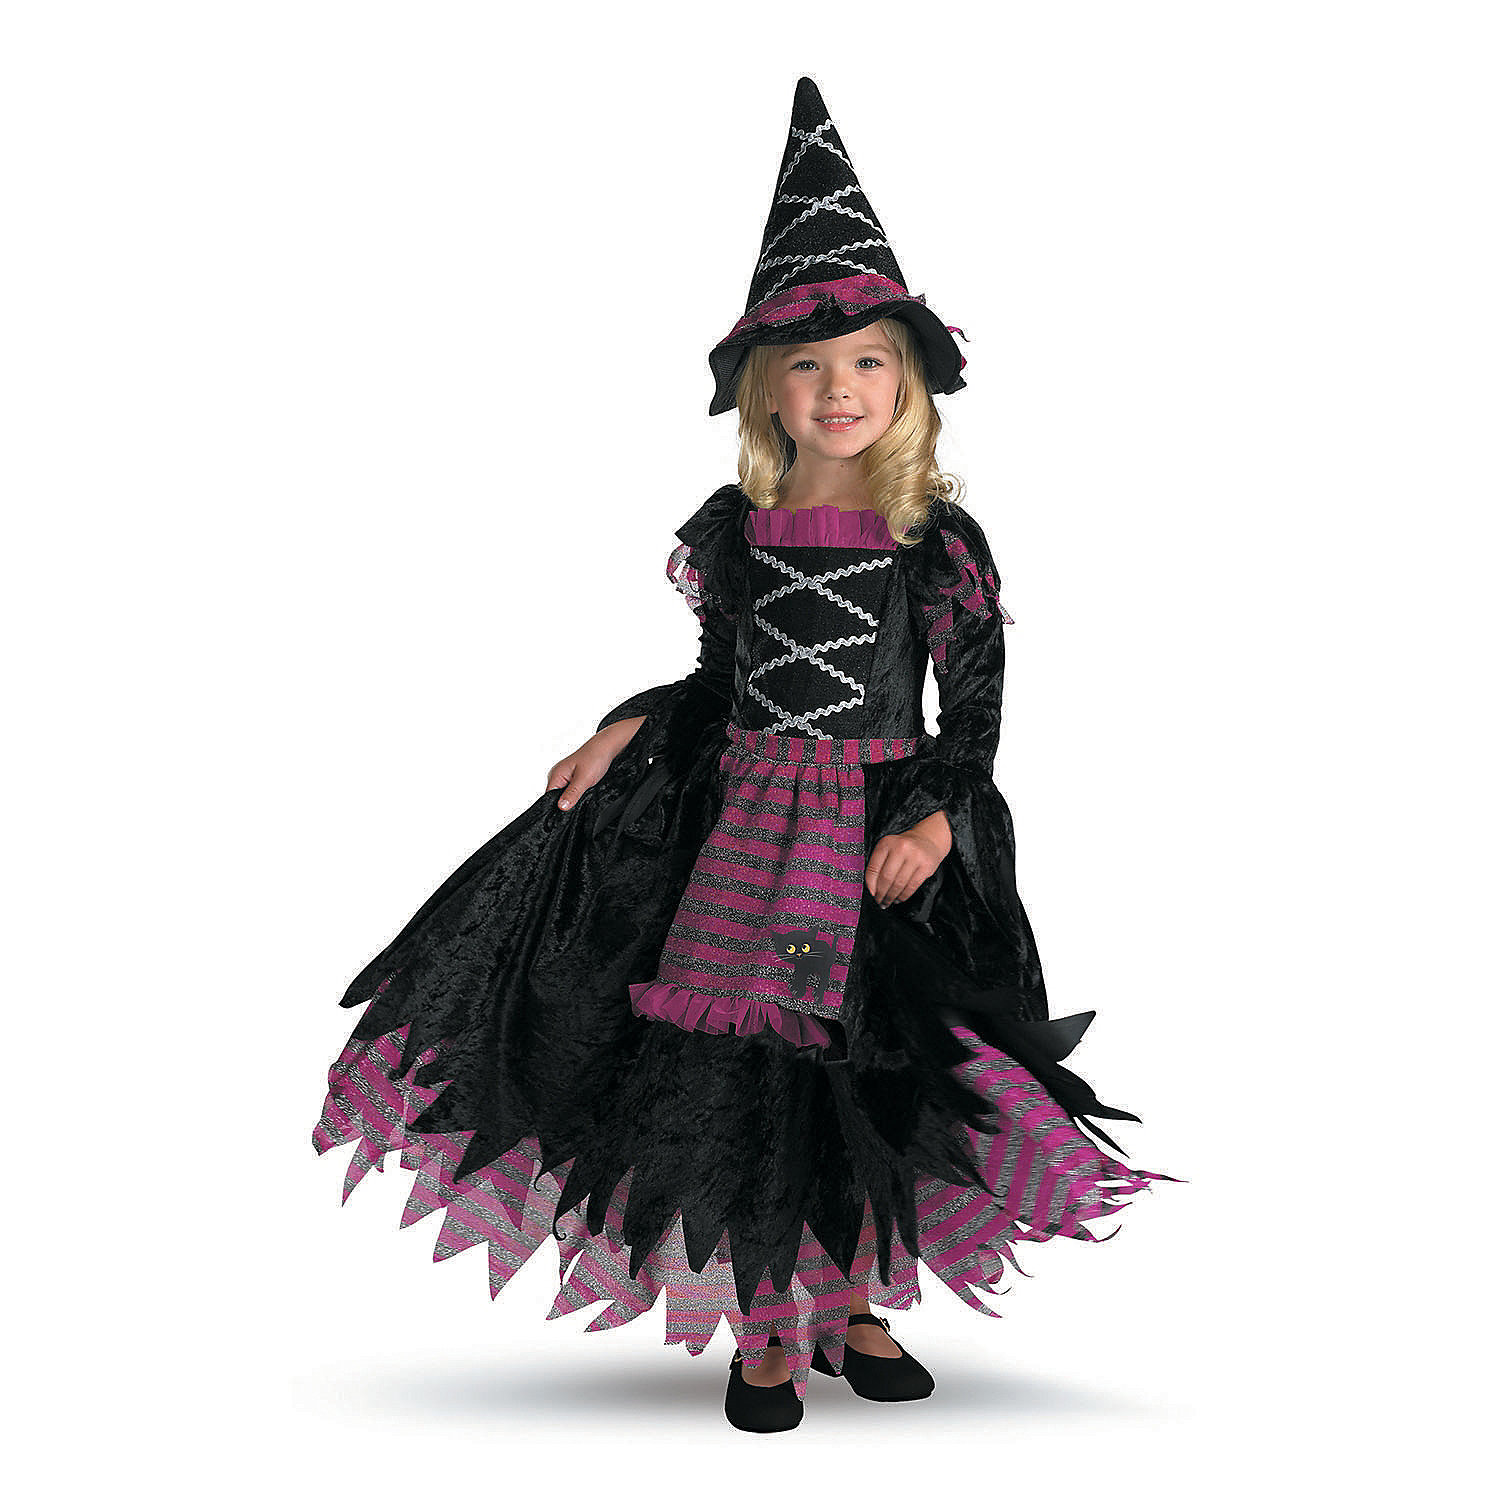 Disguise Girls' Fairytale Witch Costume - Size 4-6 - image 1 of 5